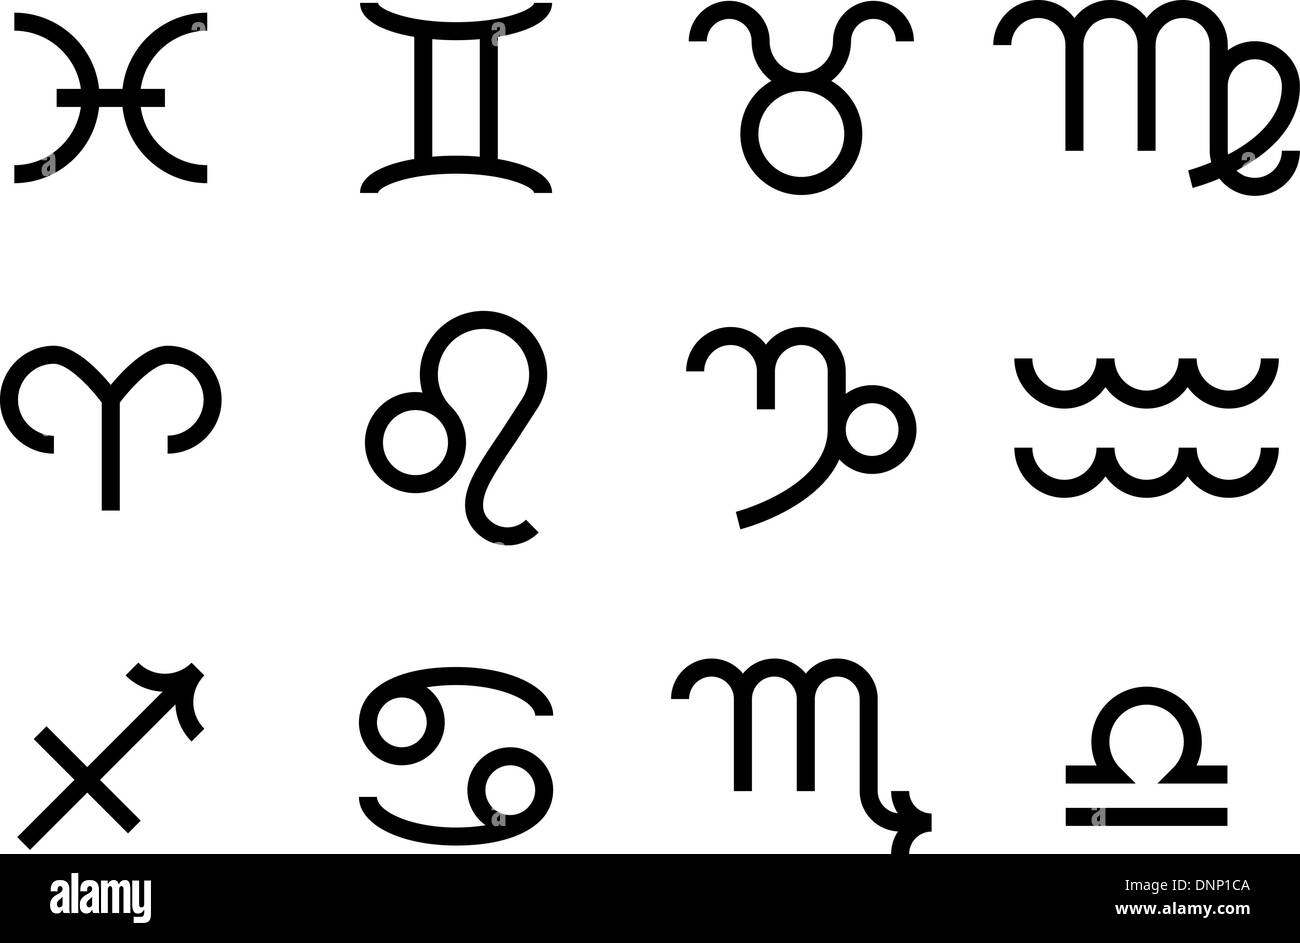 A set of zodiac sign icons representing the twelve signs of the zodiac for horoscopes and the like Stock Vector